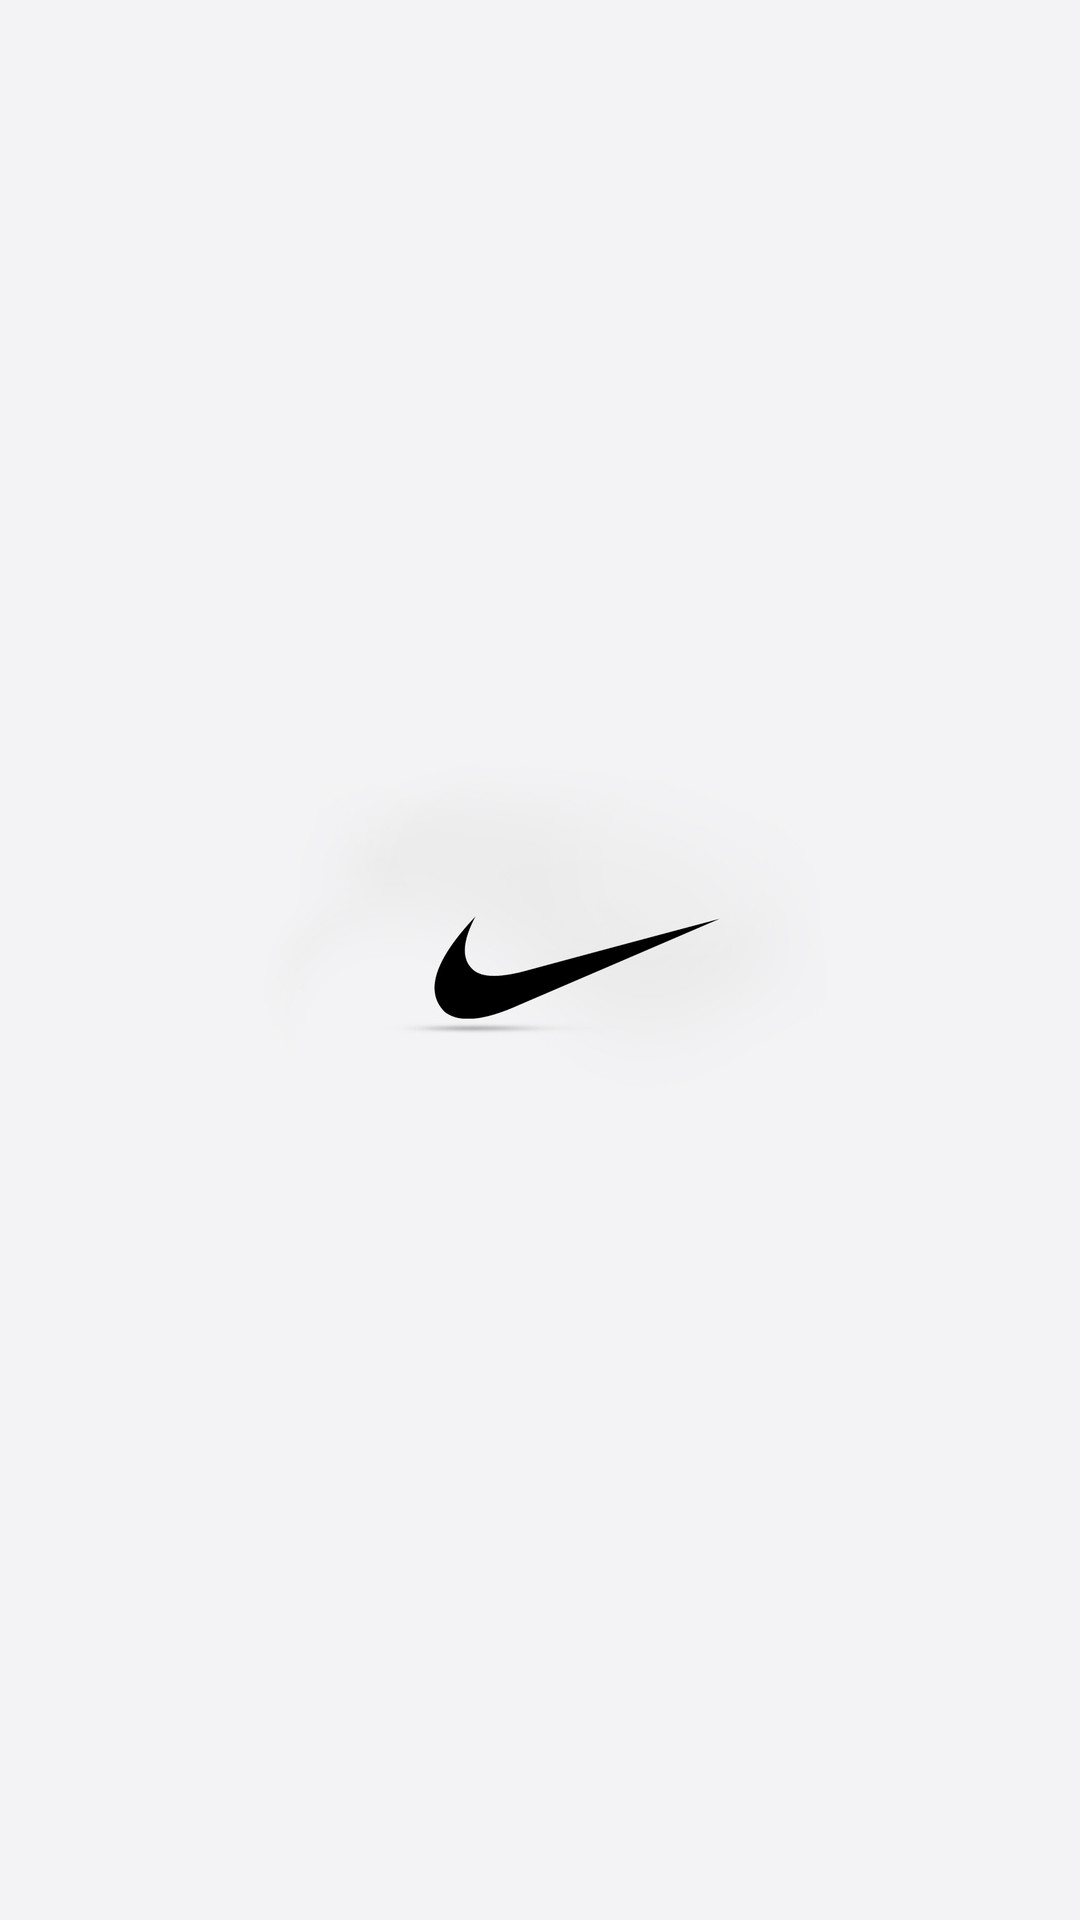 Nike htc one wallpaper – Best htc one wallpapers